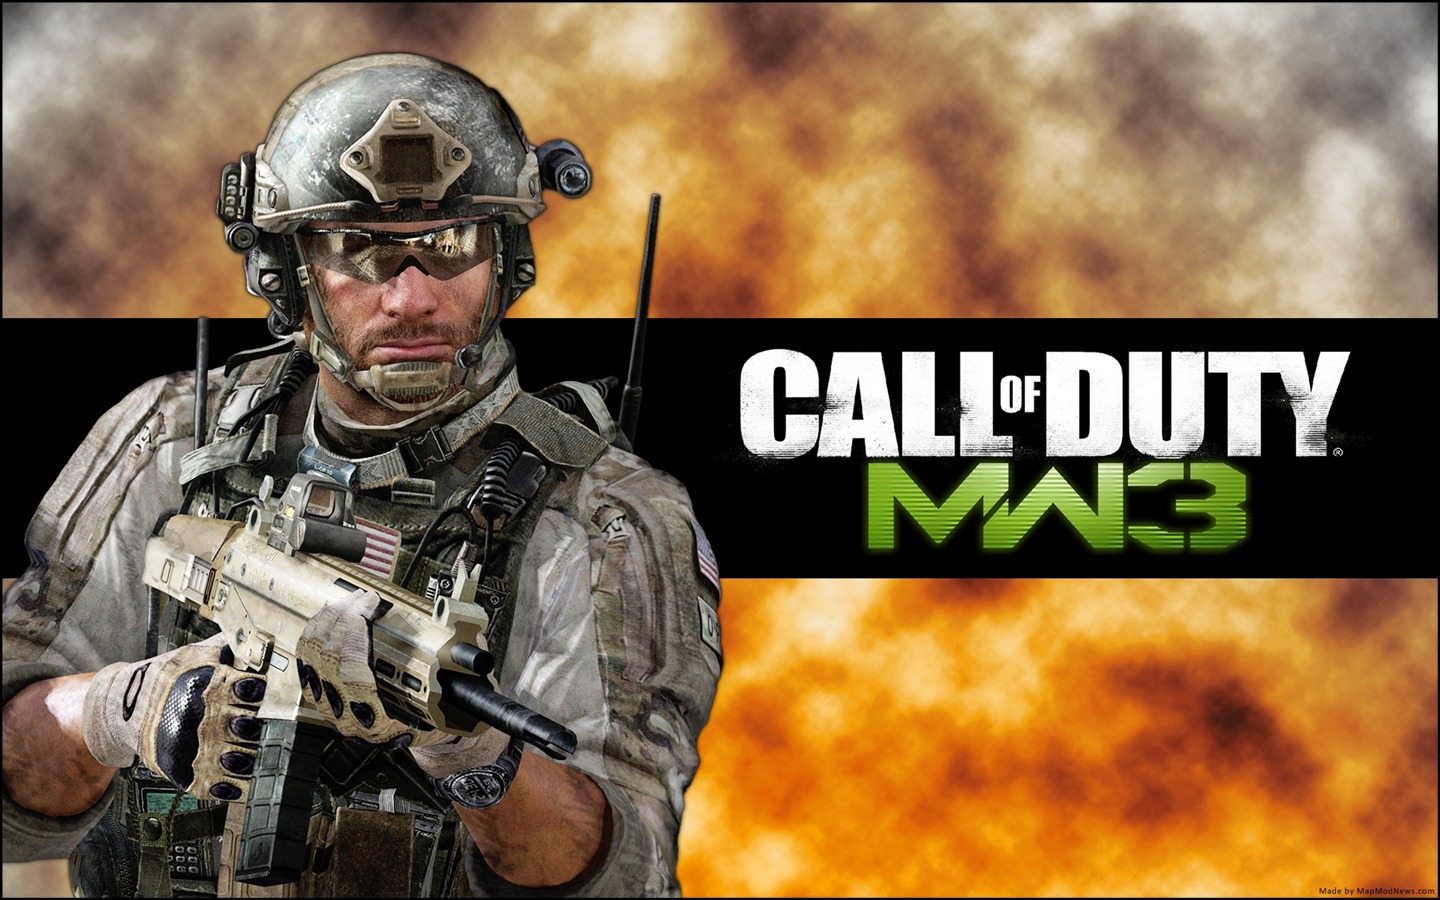 Call of Duty: MW3 wallpapers HD #14 - 1440x900